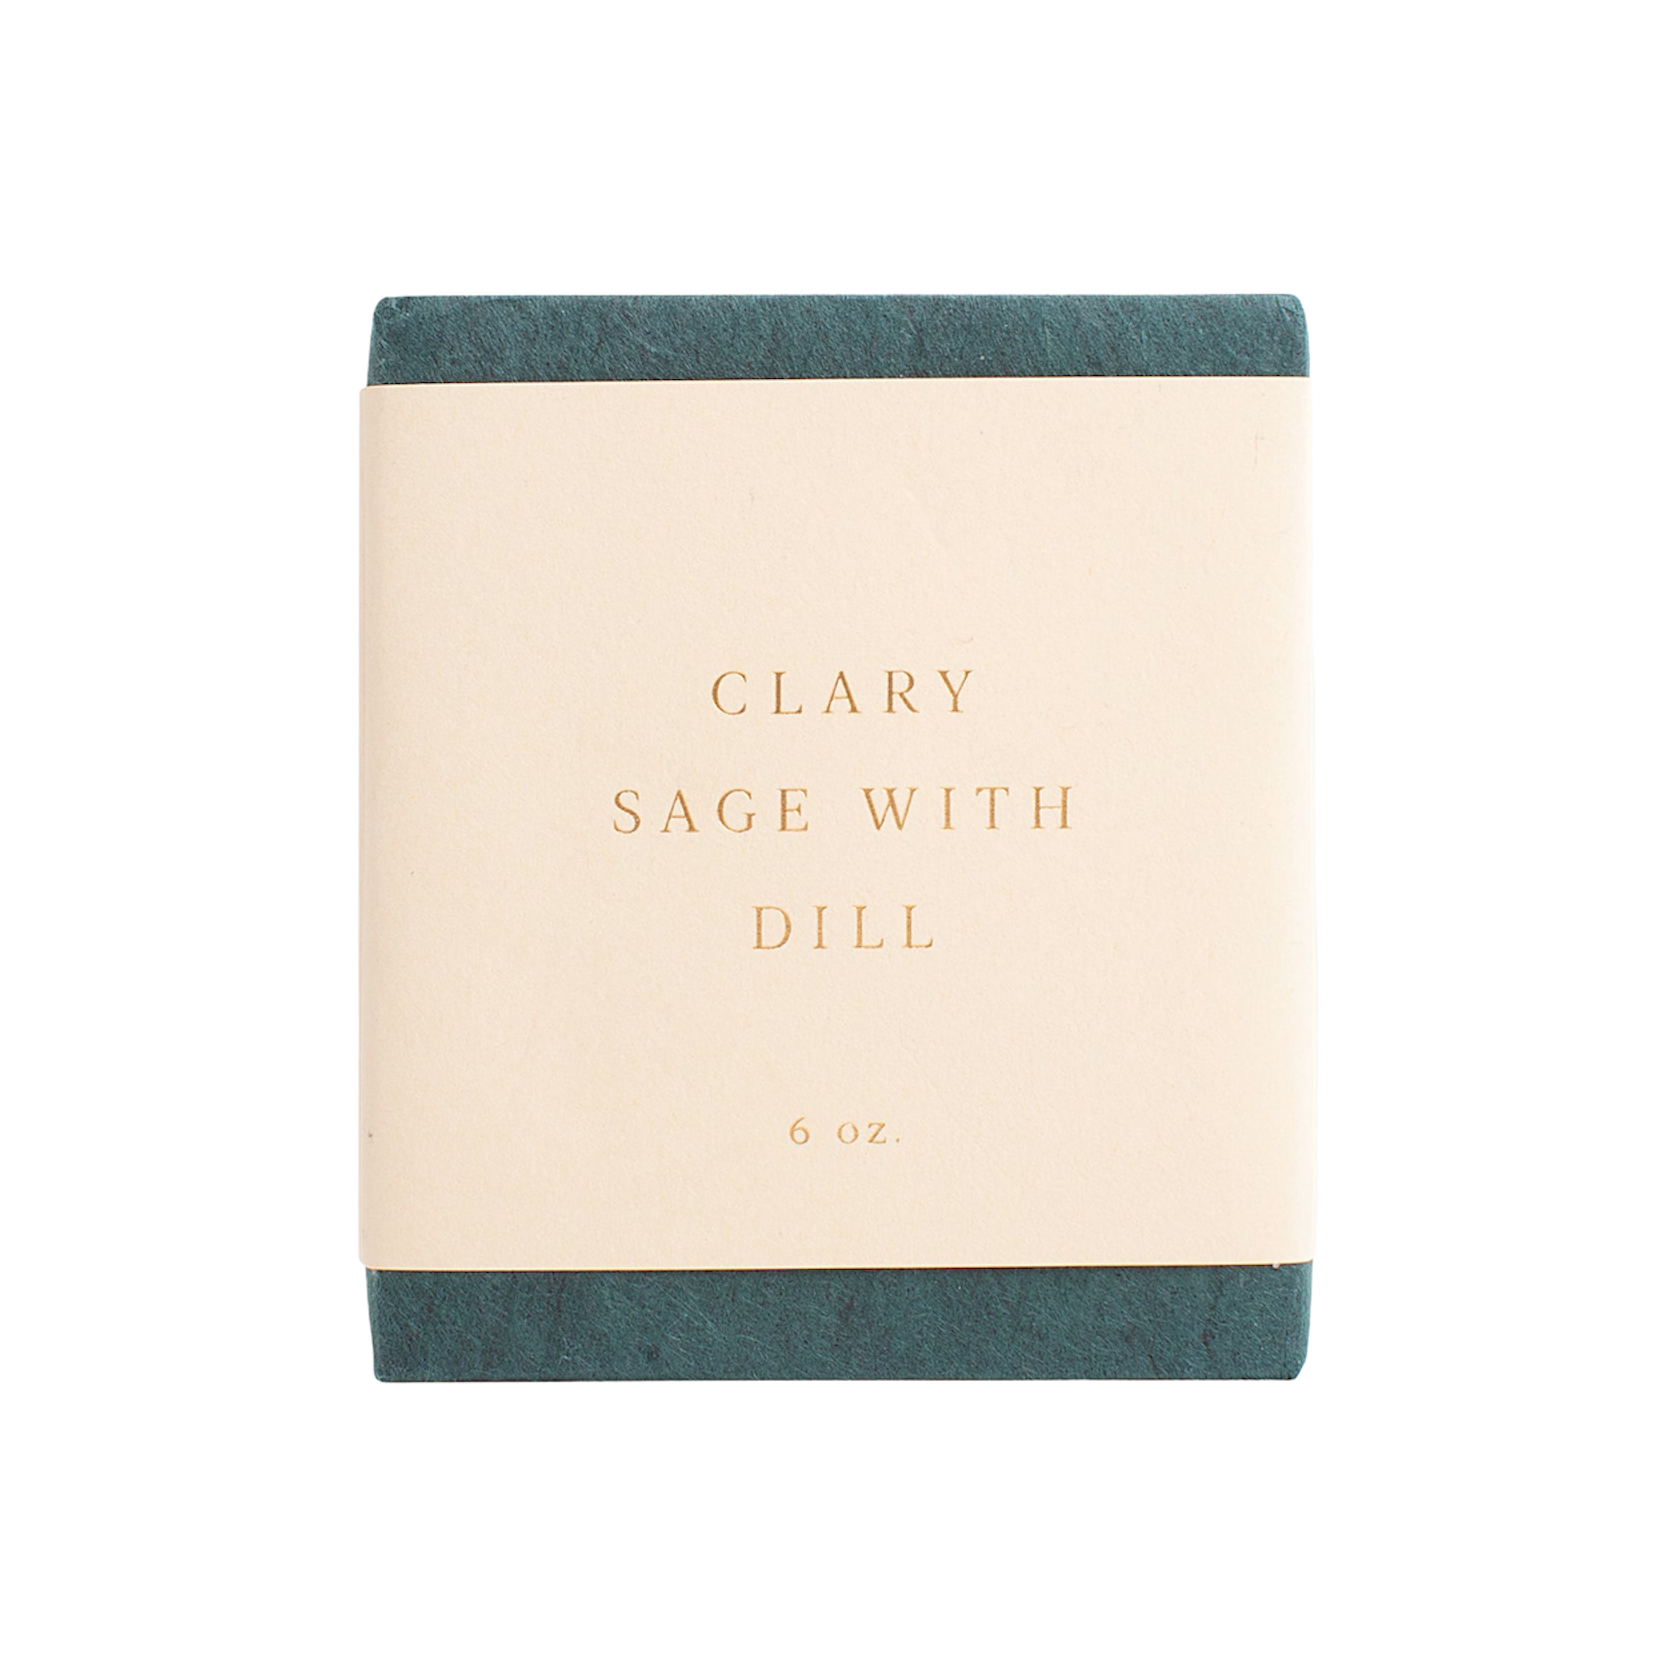 Clary Sage With Dill Bar Soap